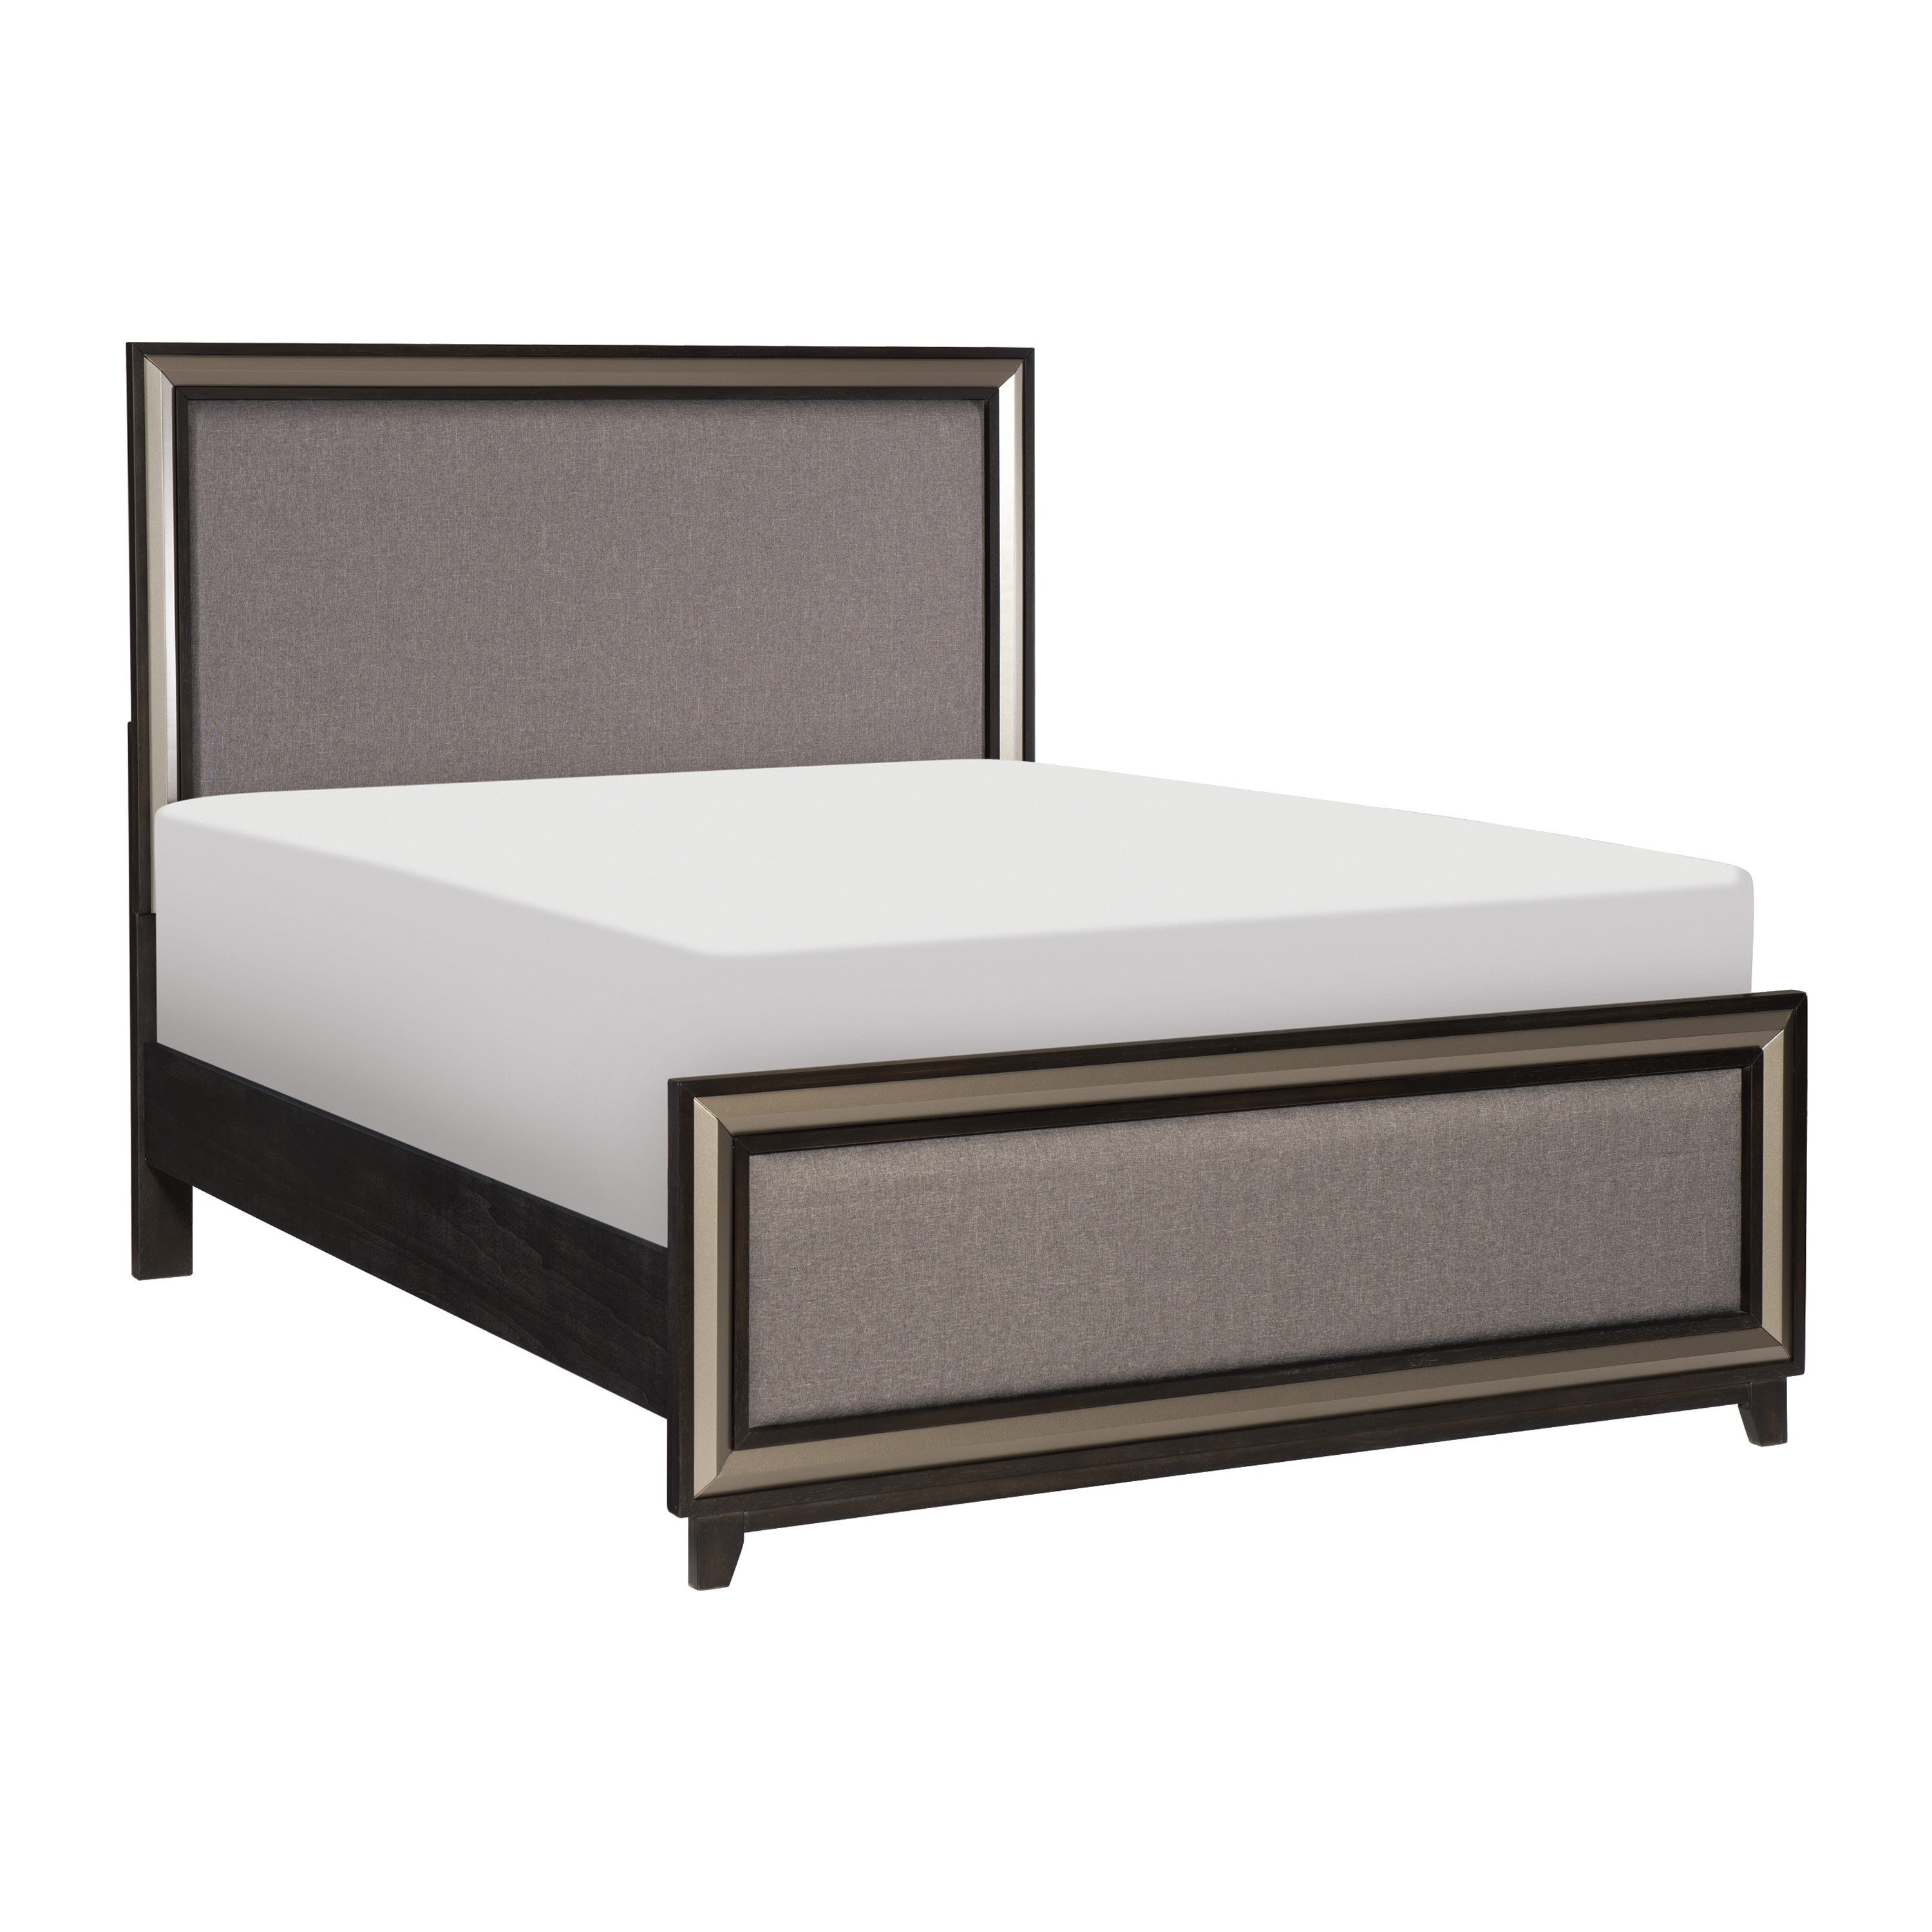 Ebony Finish and Silver Lining Modern Queen Bed Gray Upholstered Headboard Footboard Contemporary Wooden Bedroom Furniture Panel Bed